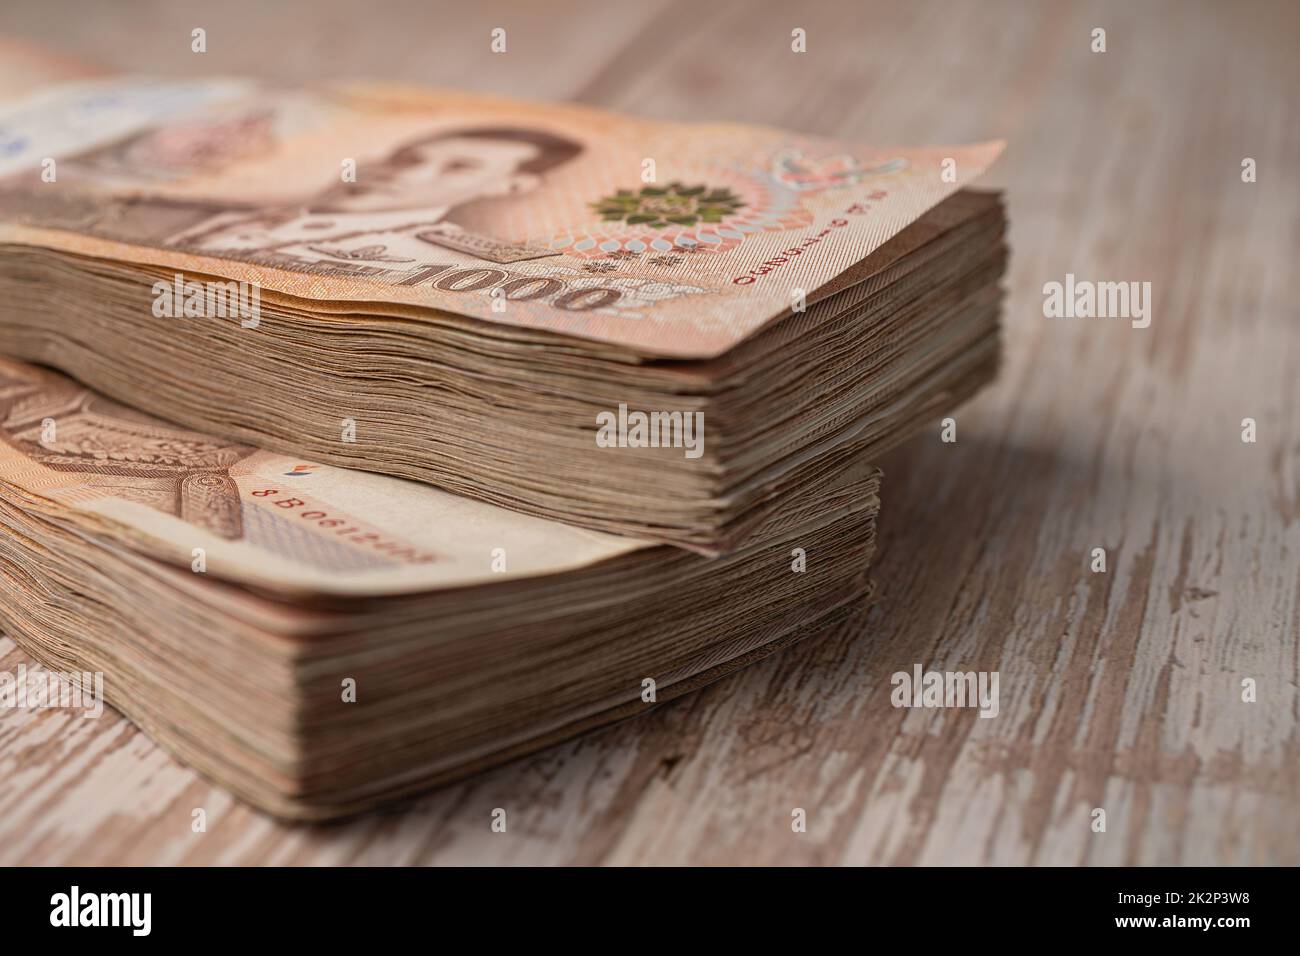 Stack of Thai baht banknotes on wooden background, business saving finance investment concept. Stock Photo